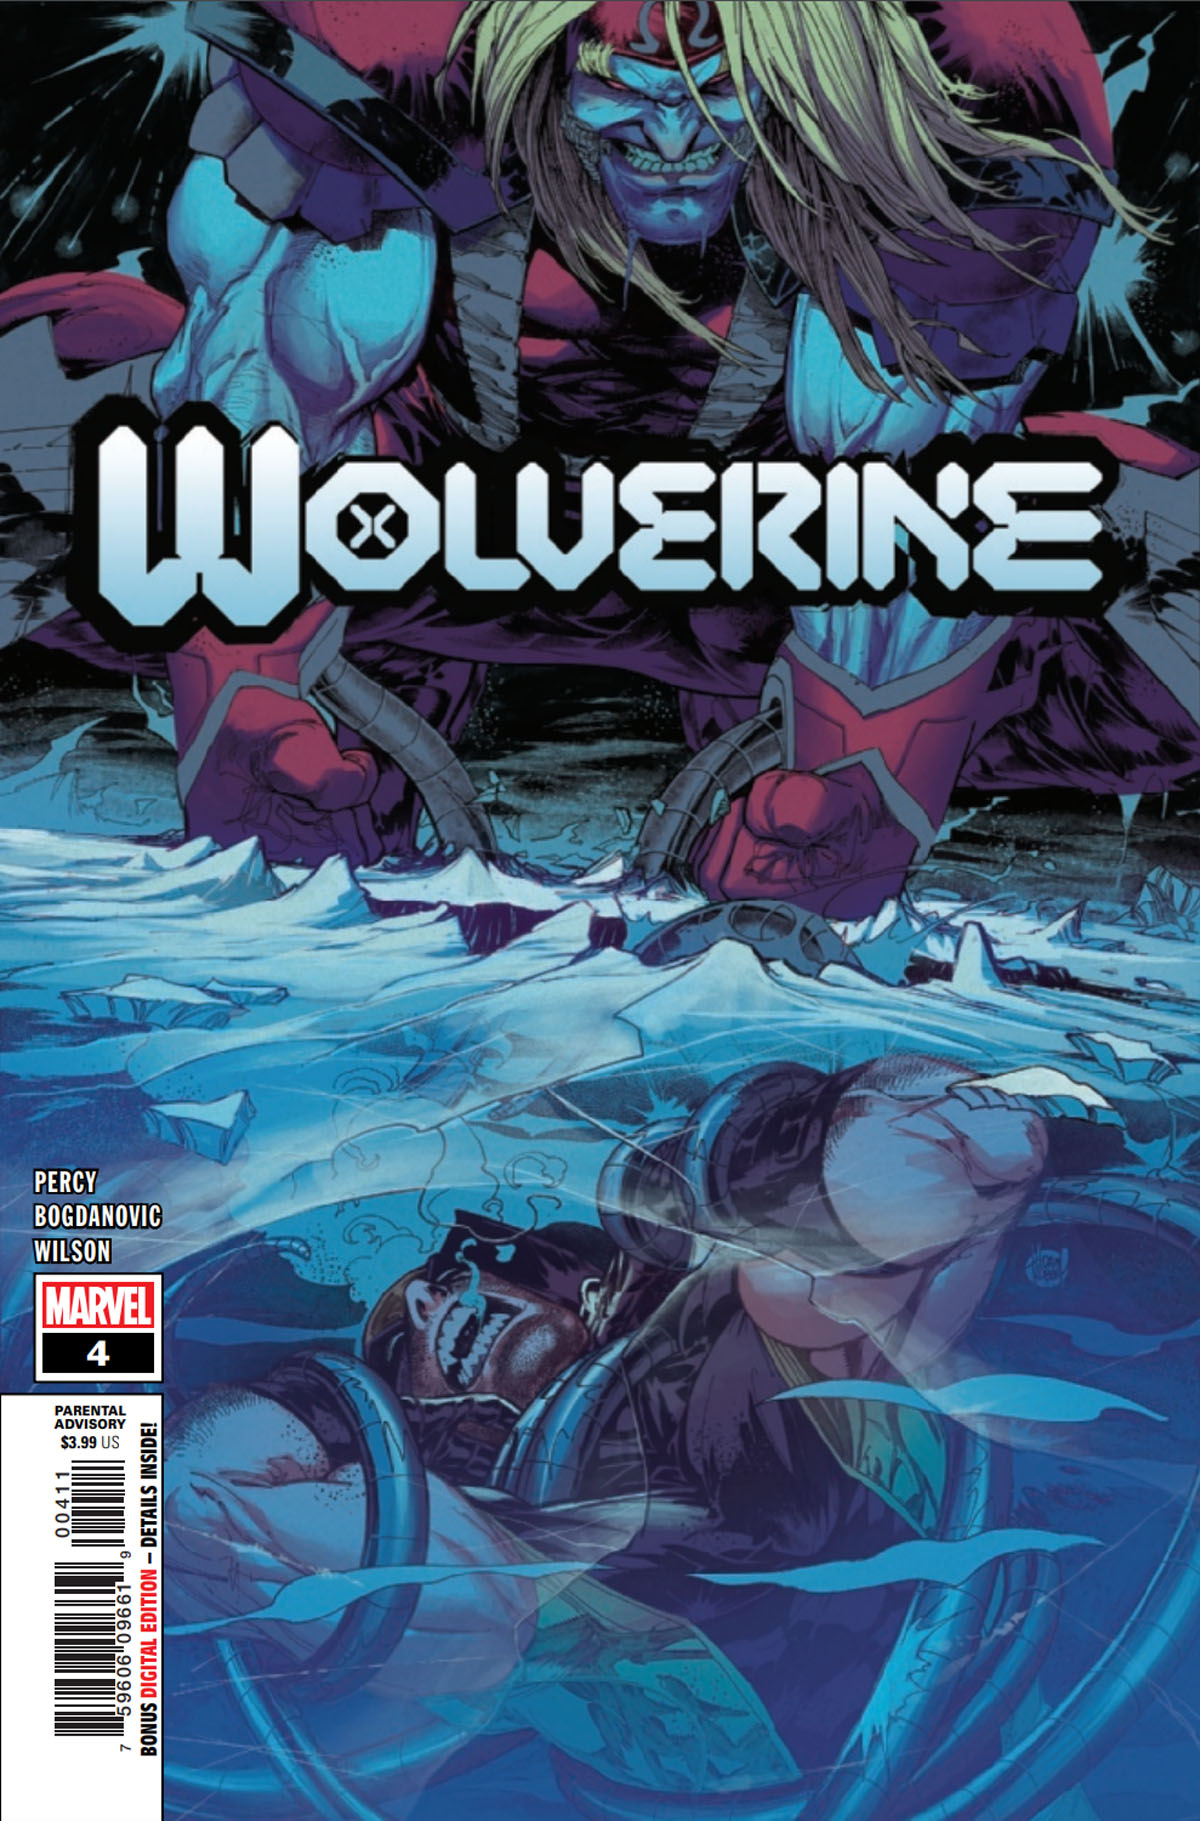 Wolverine #4 cover